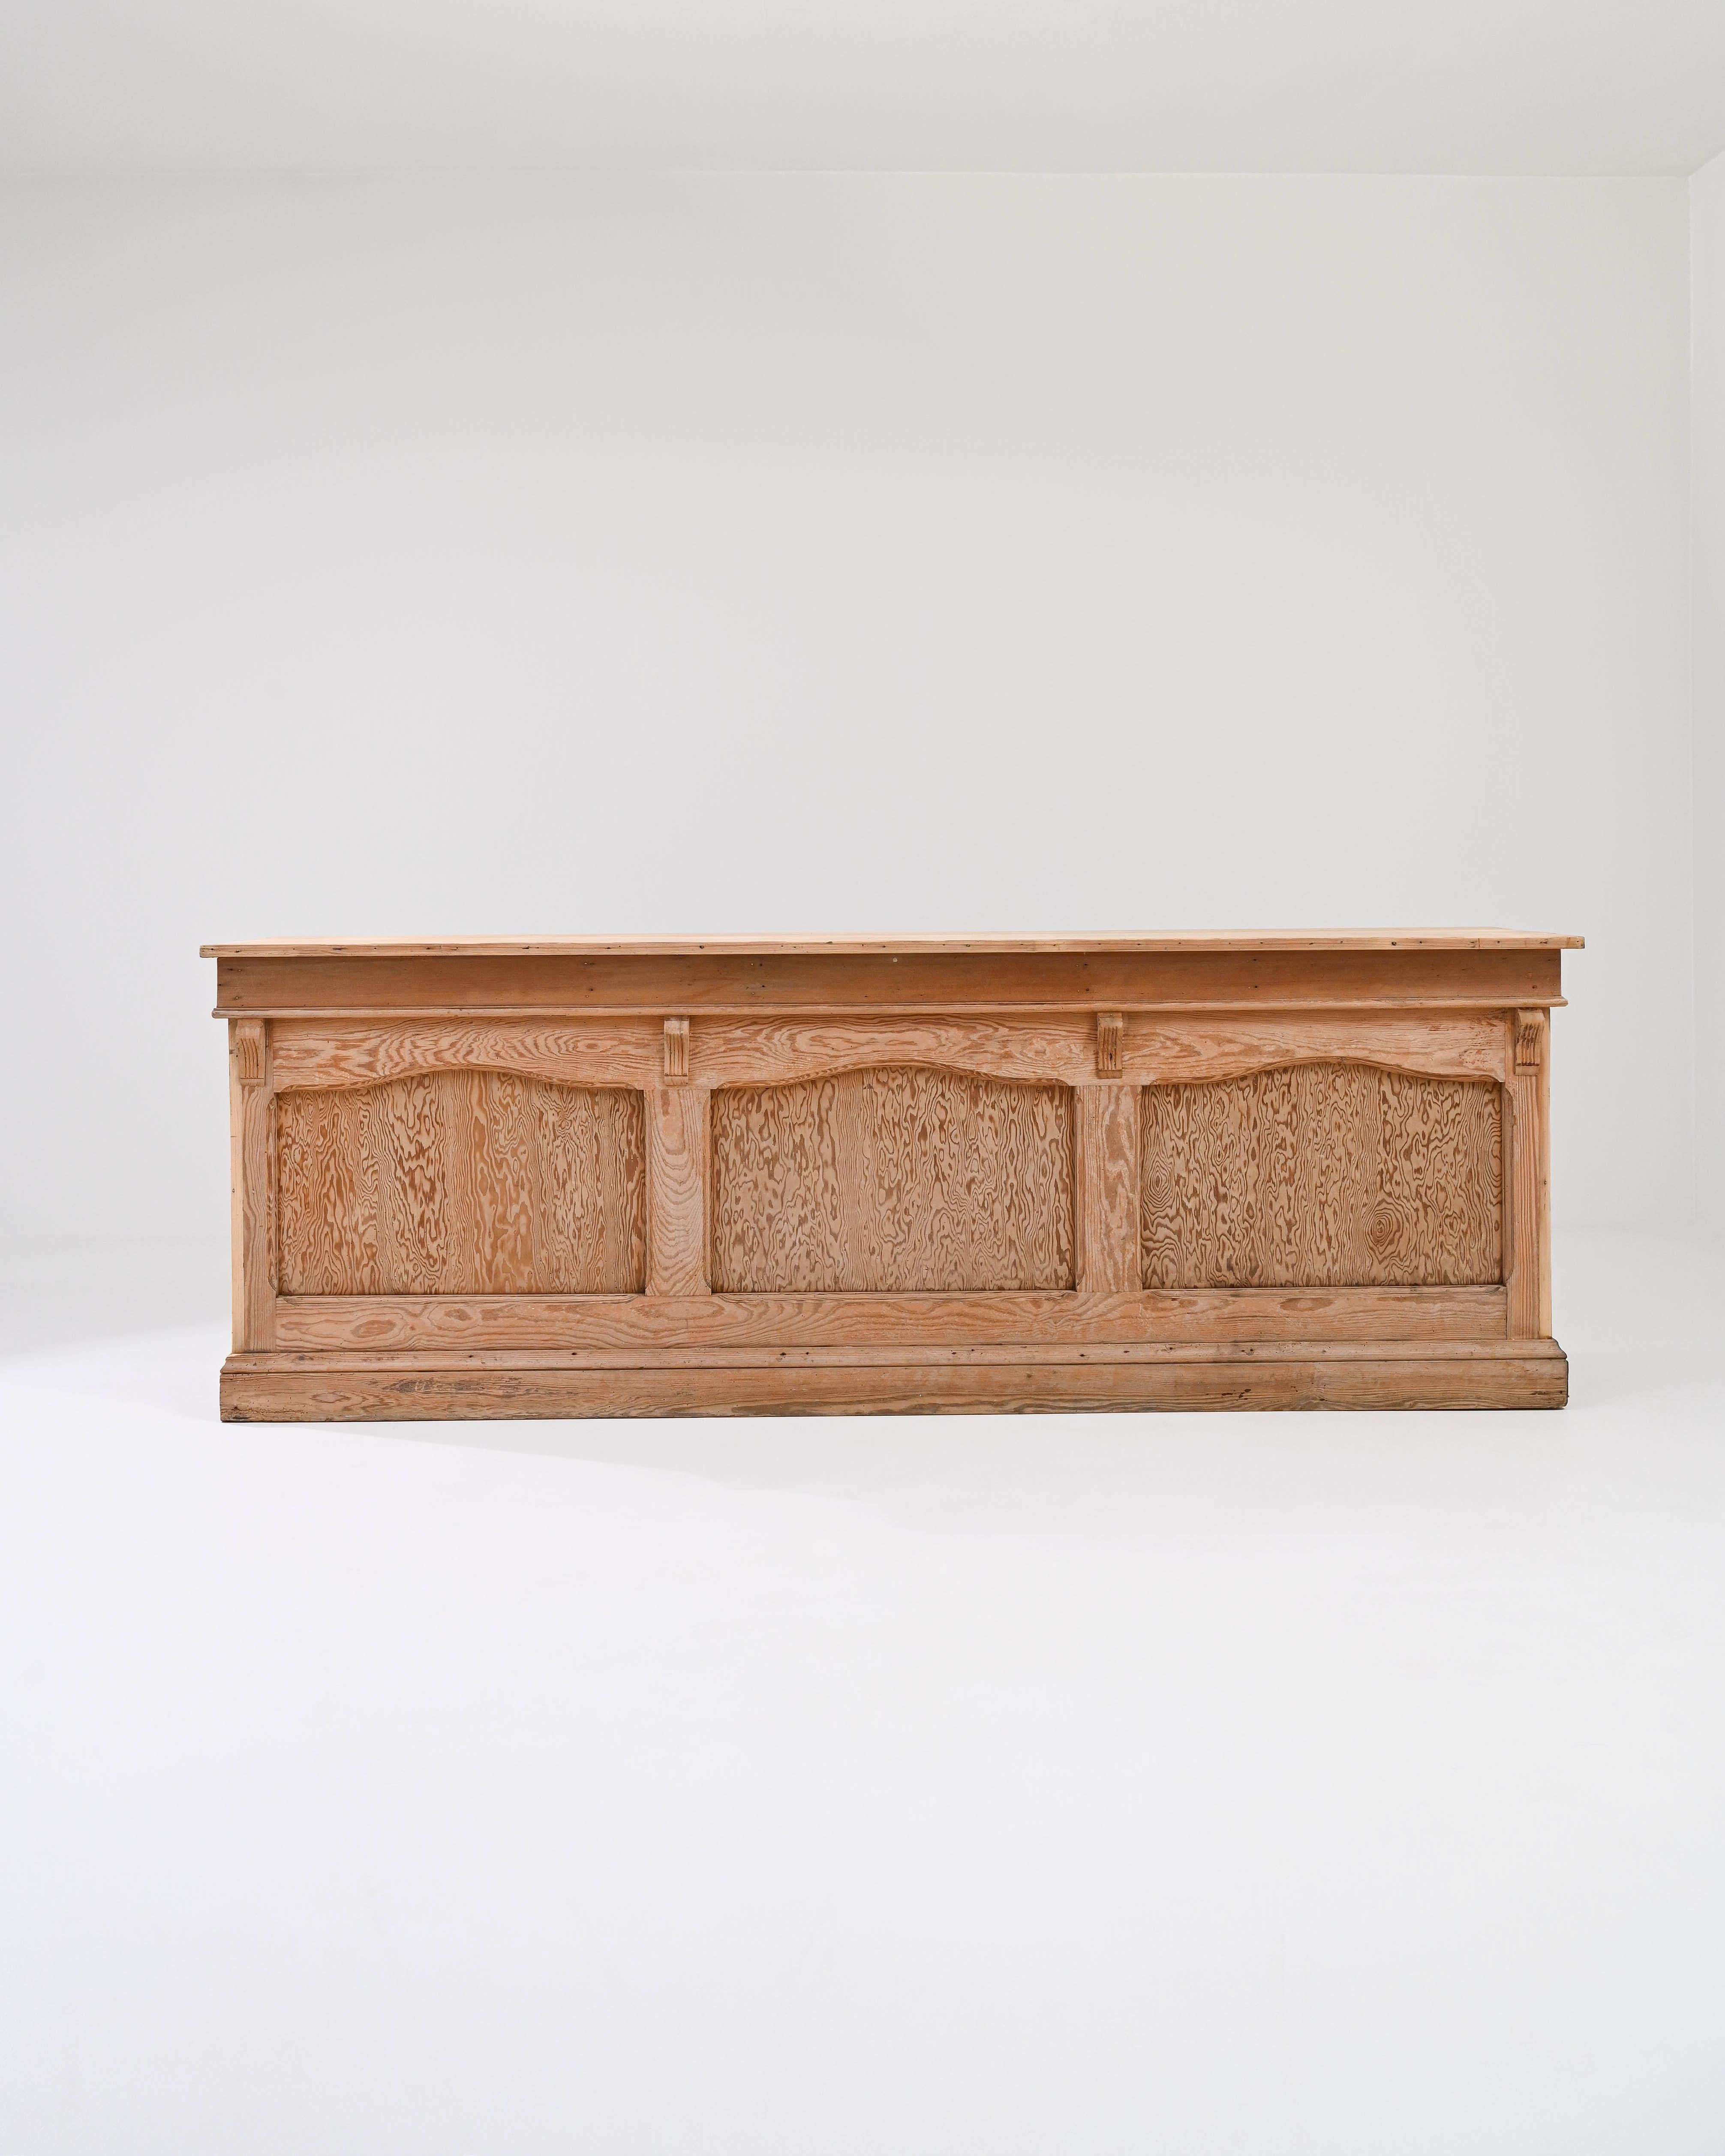 A wooden counter made circa 1900 and sourced in France. This expansive bar counter features four large compartments and two petite drawers. The natural wood grain that coats the buffet’s front paneling shimmers and swims in an almost psychedelic